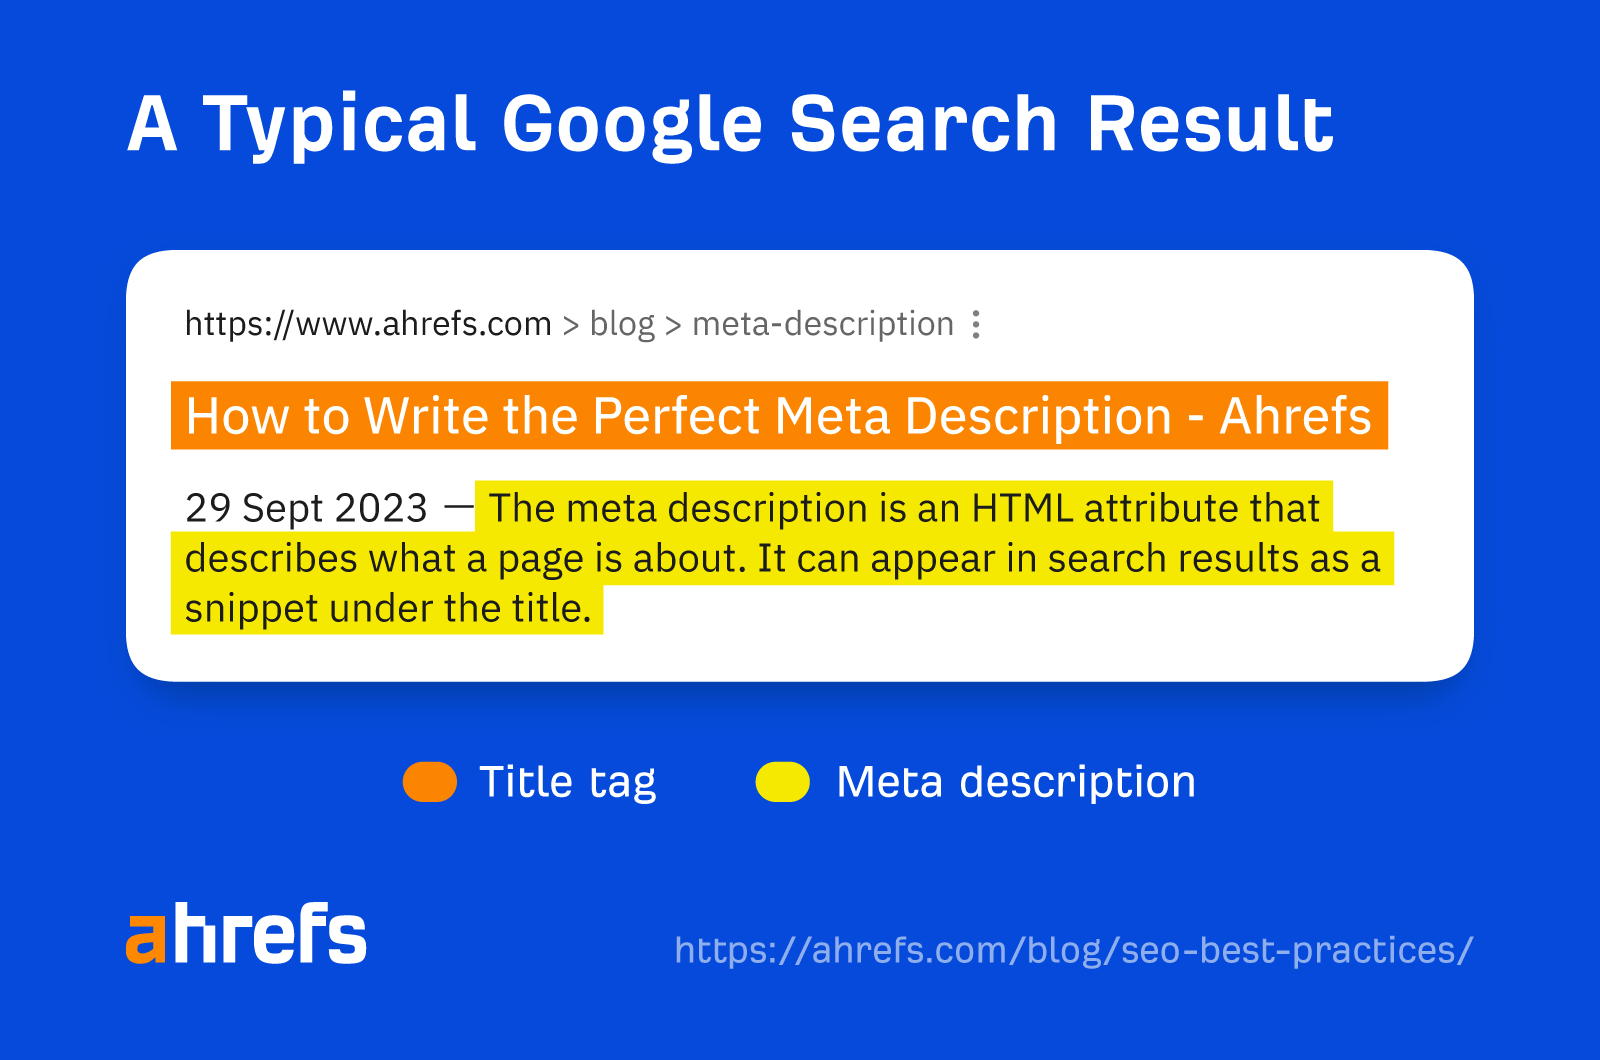 Components of a typical Google search result
